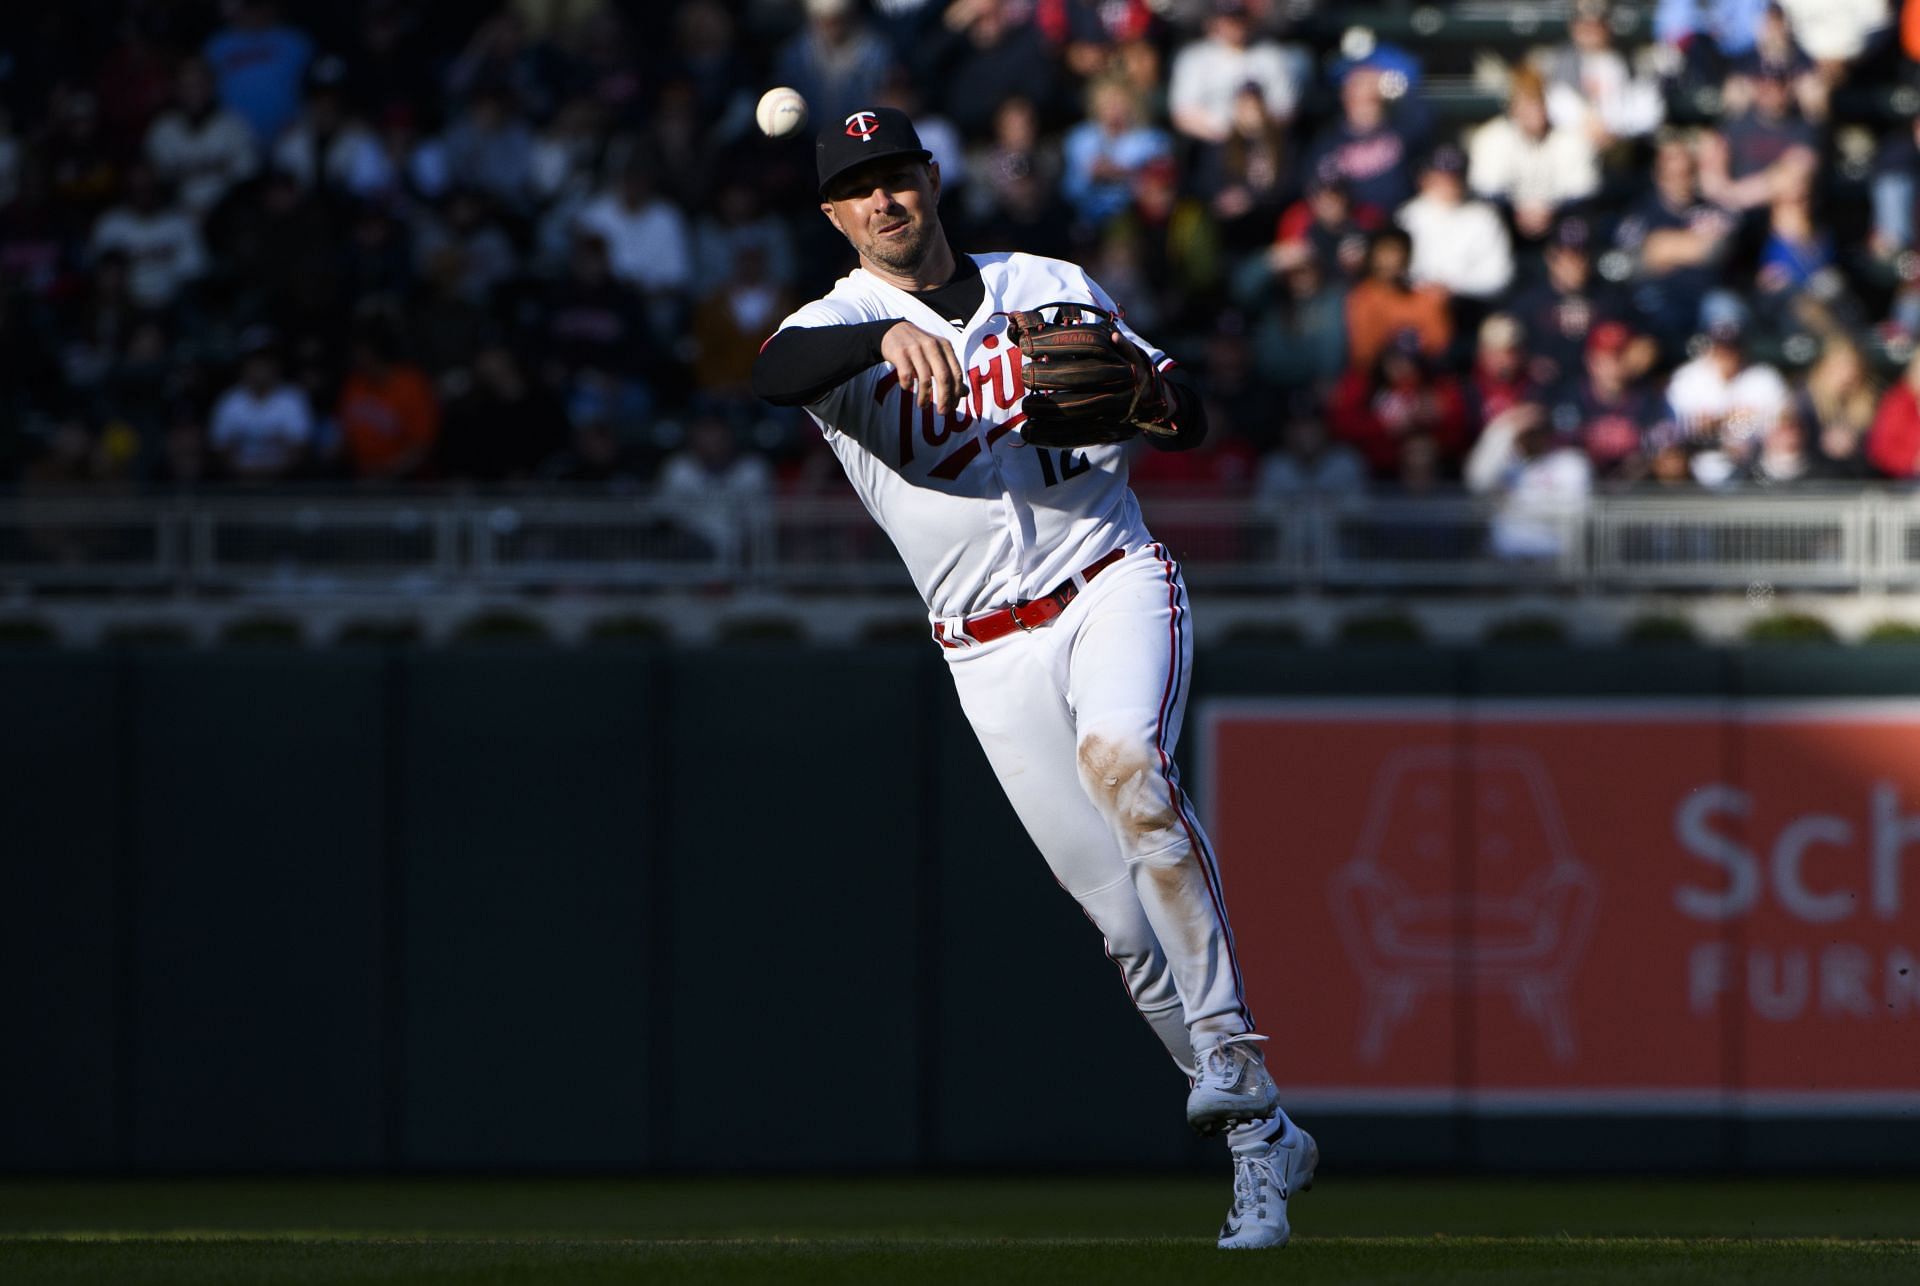 Minnesota Twins' Kyle Farmer needs surgery after being hit in face by pitch